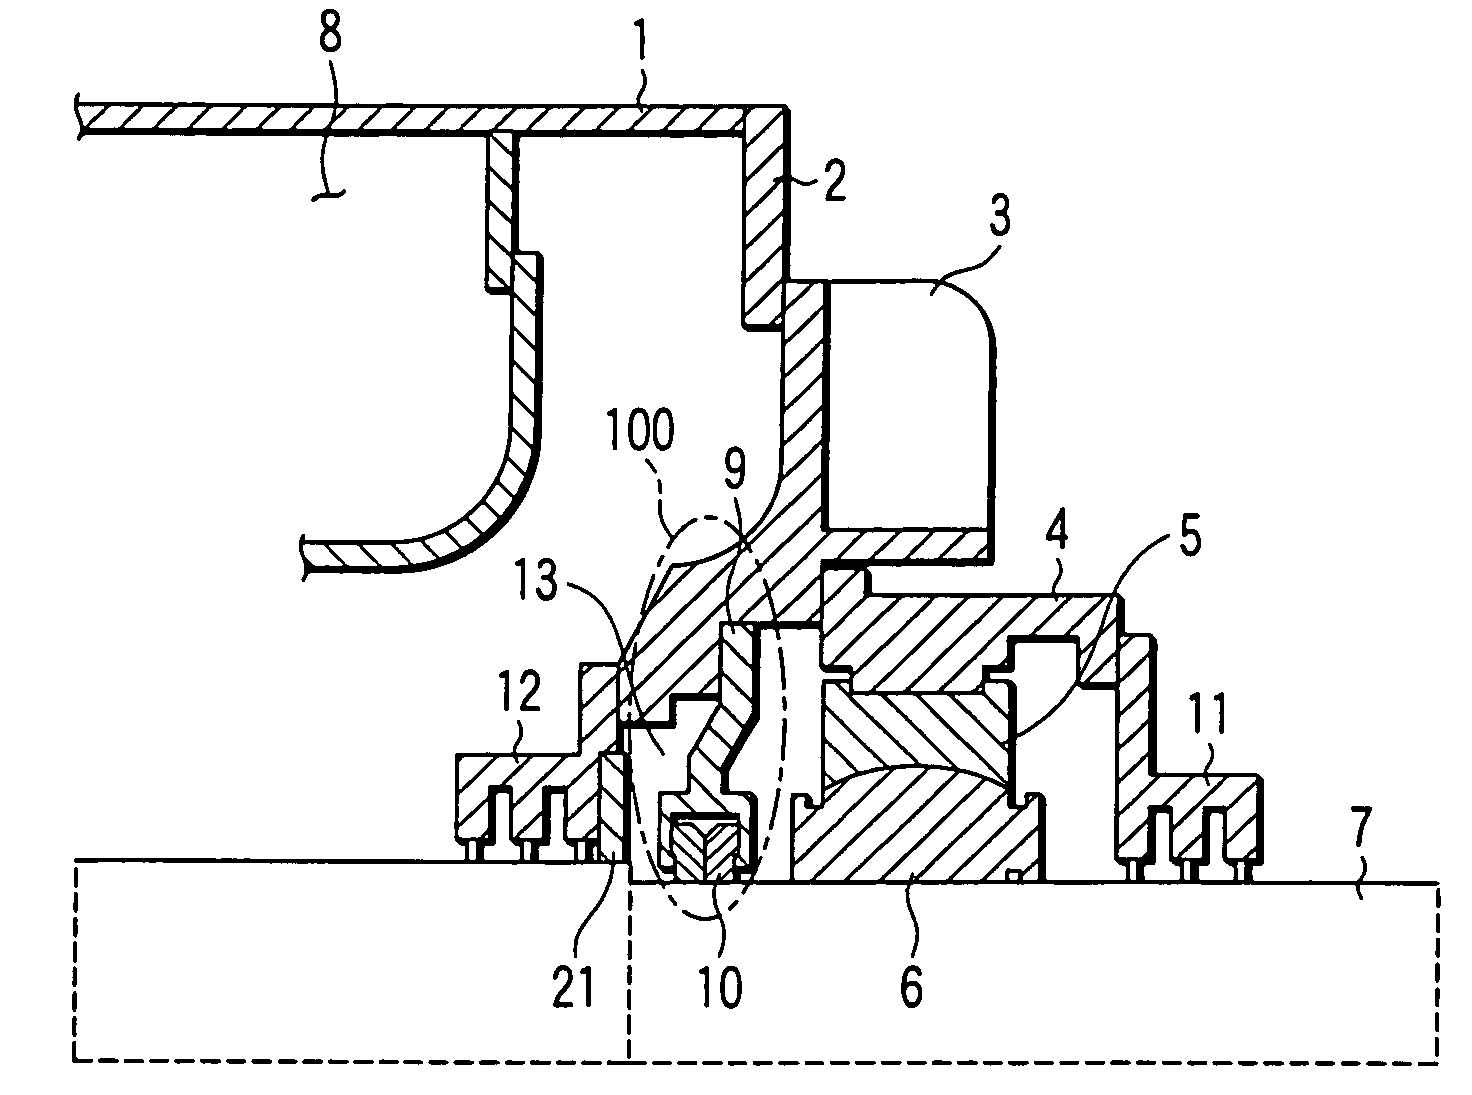 Electric rotating machine with bearing seals